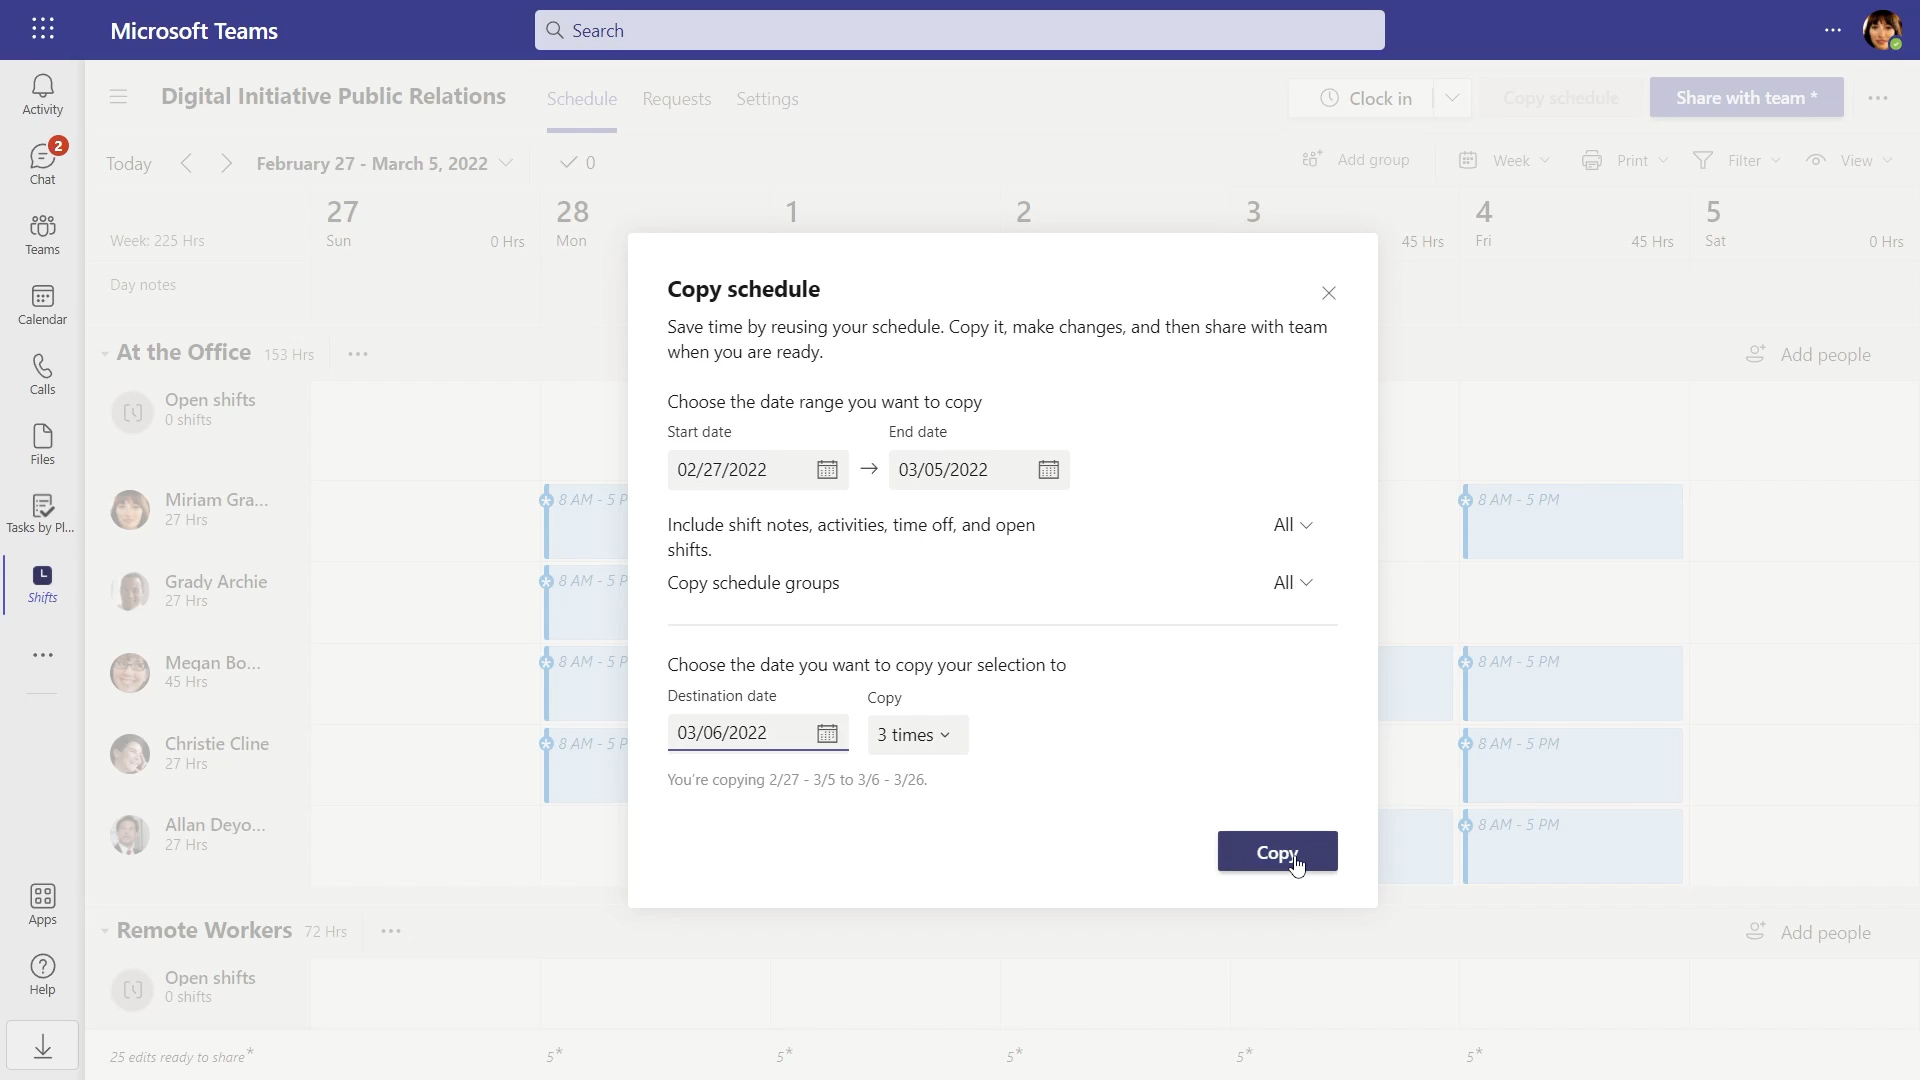 Screenshot showing how to copy a schedule in the Shifts app in Microsoft Teams